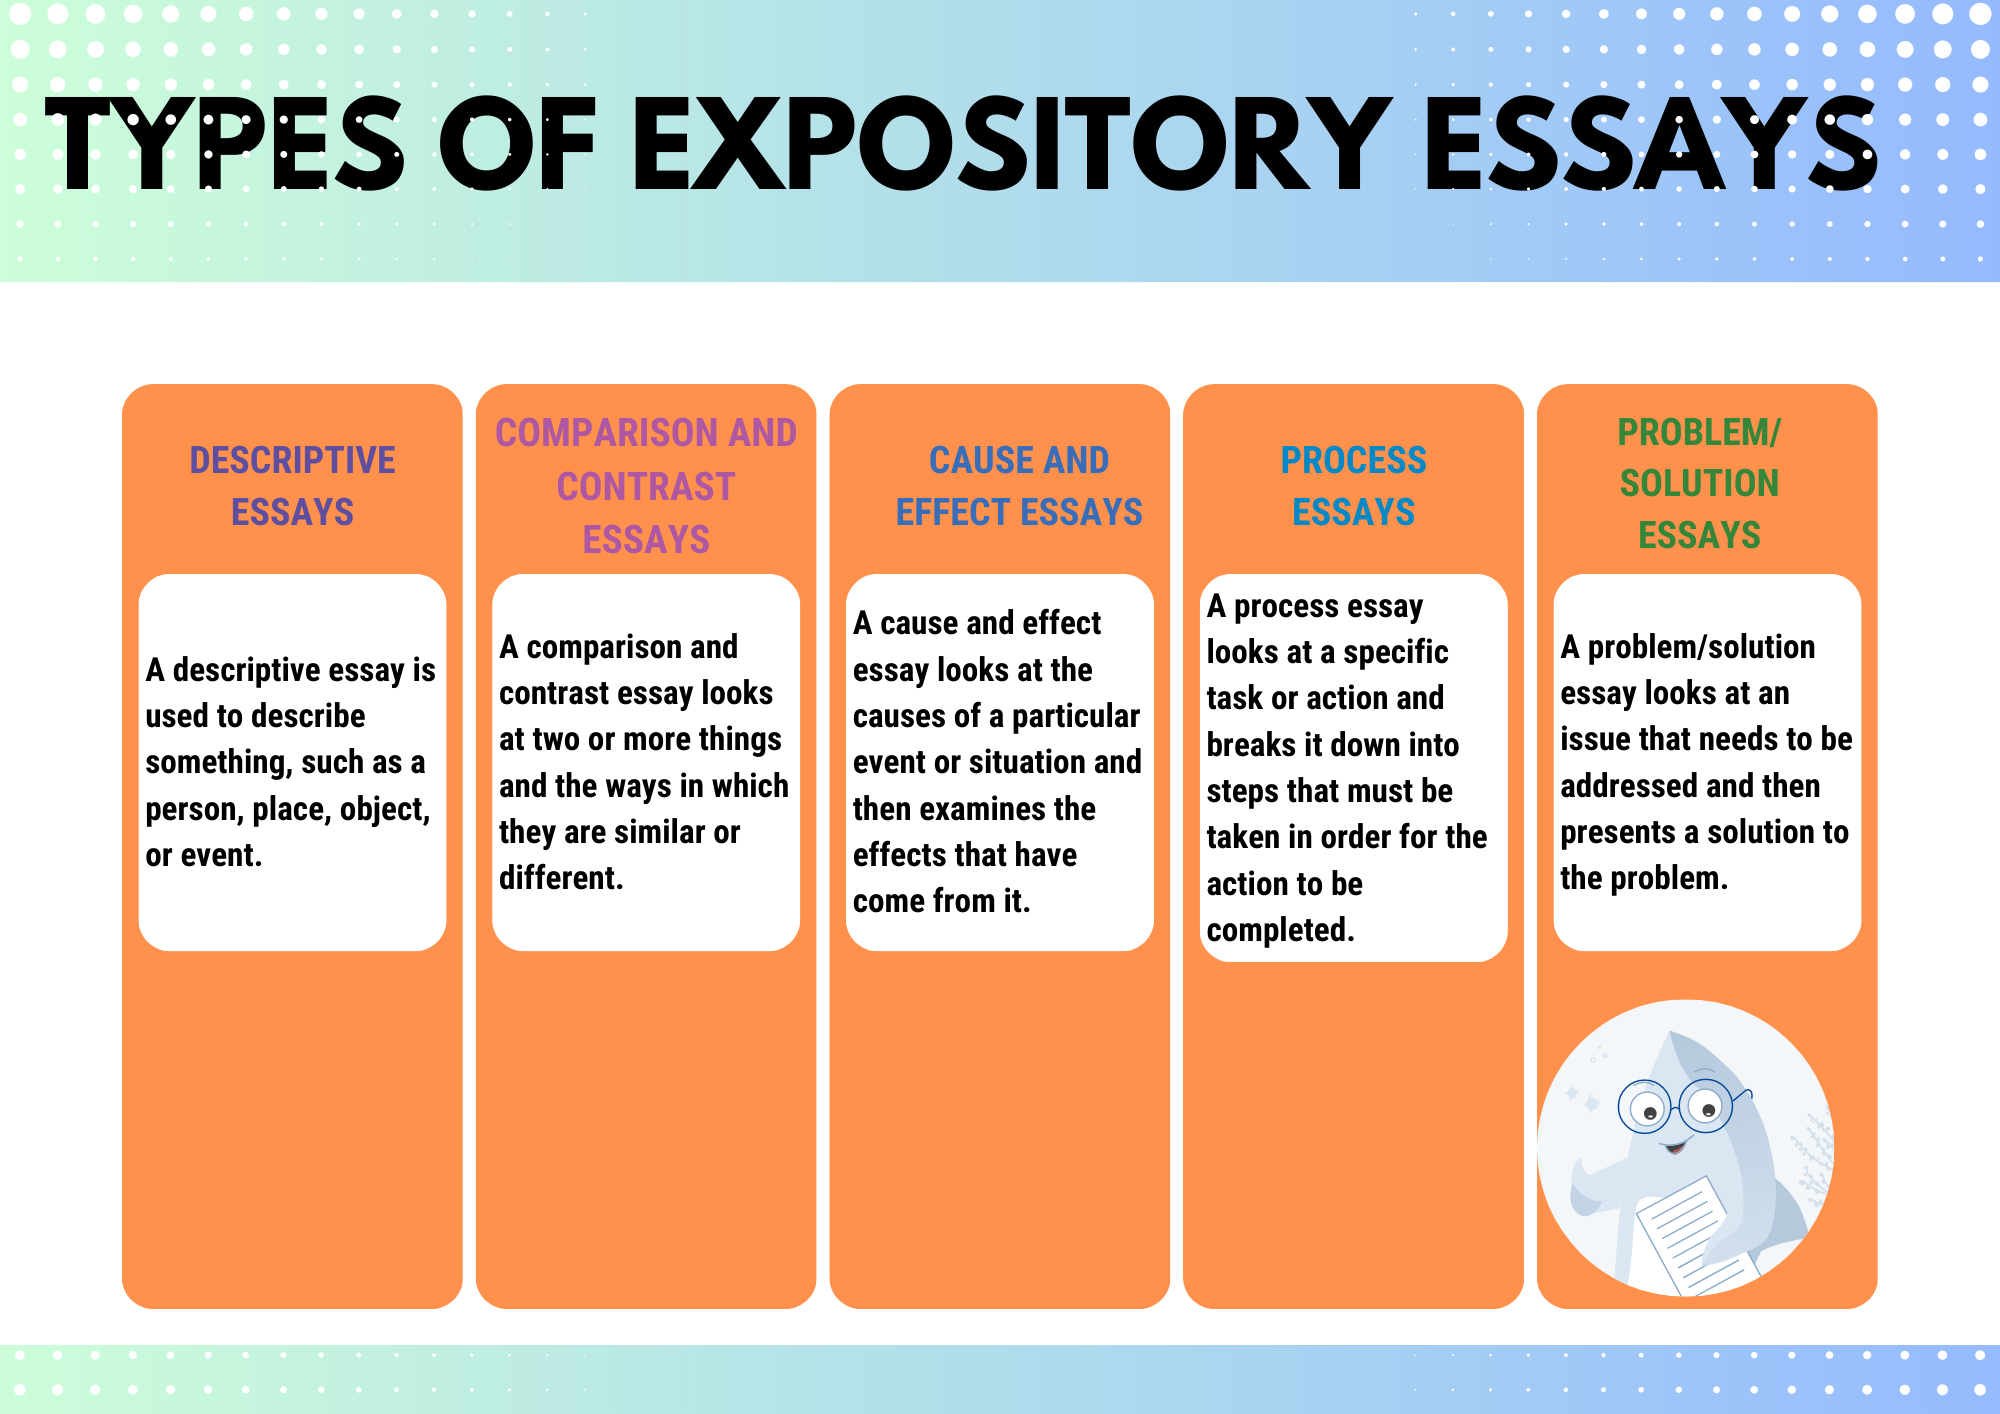 Types of expository essays